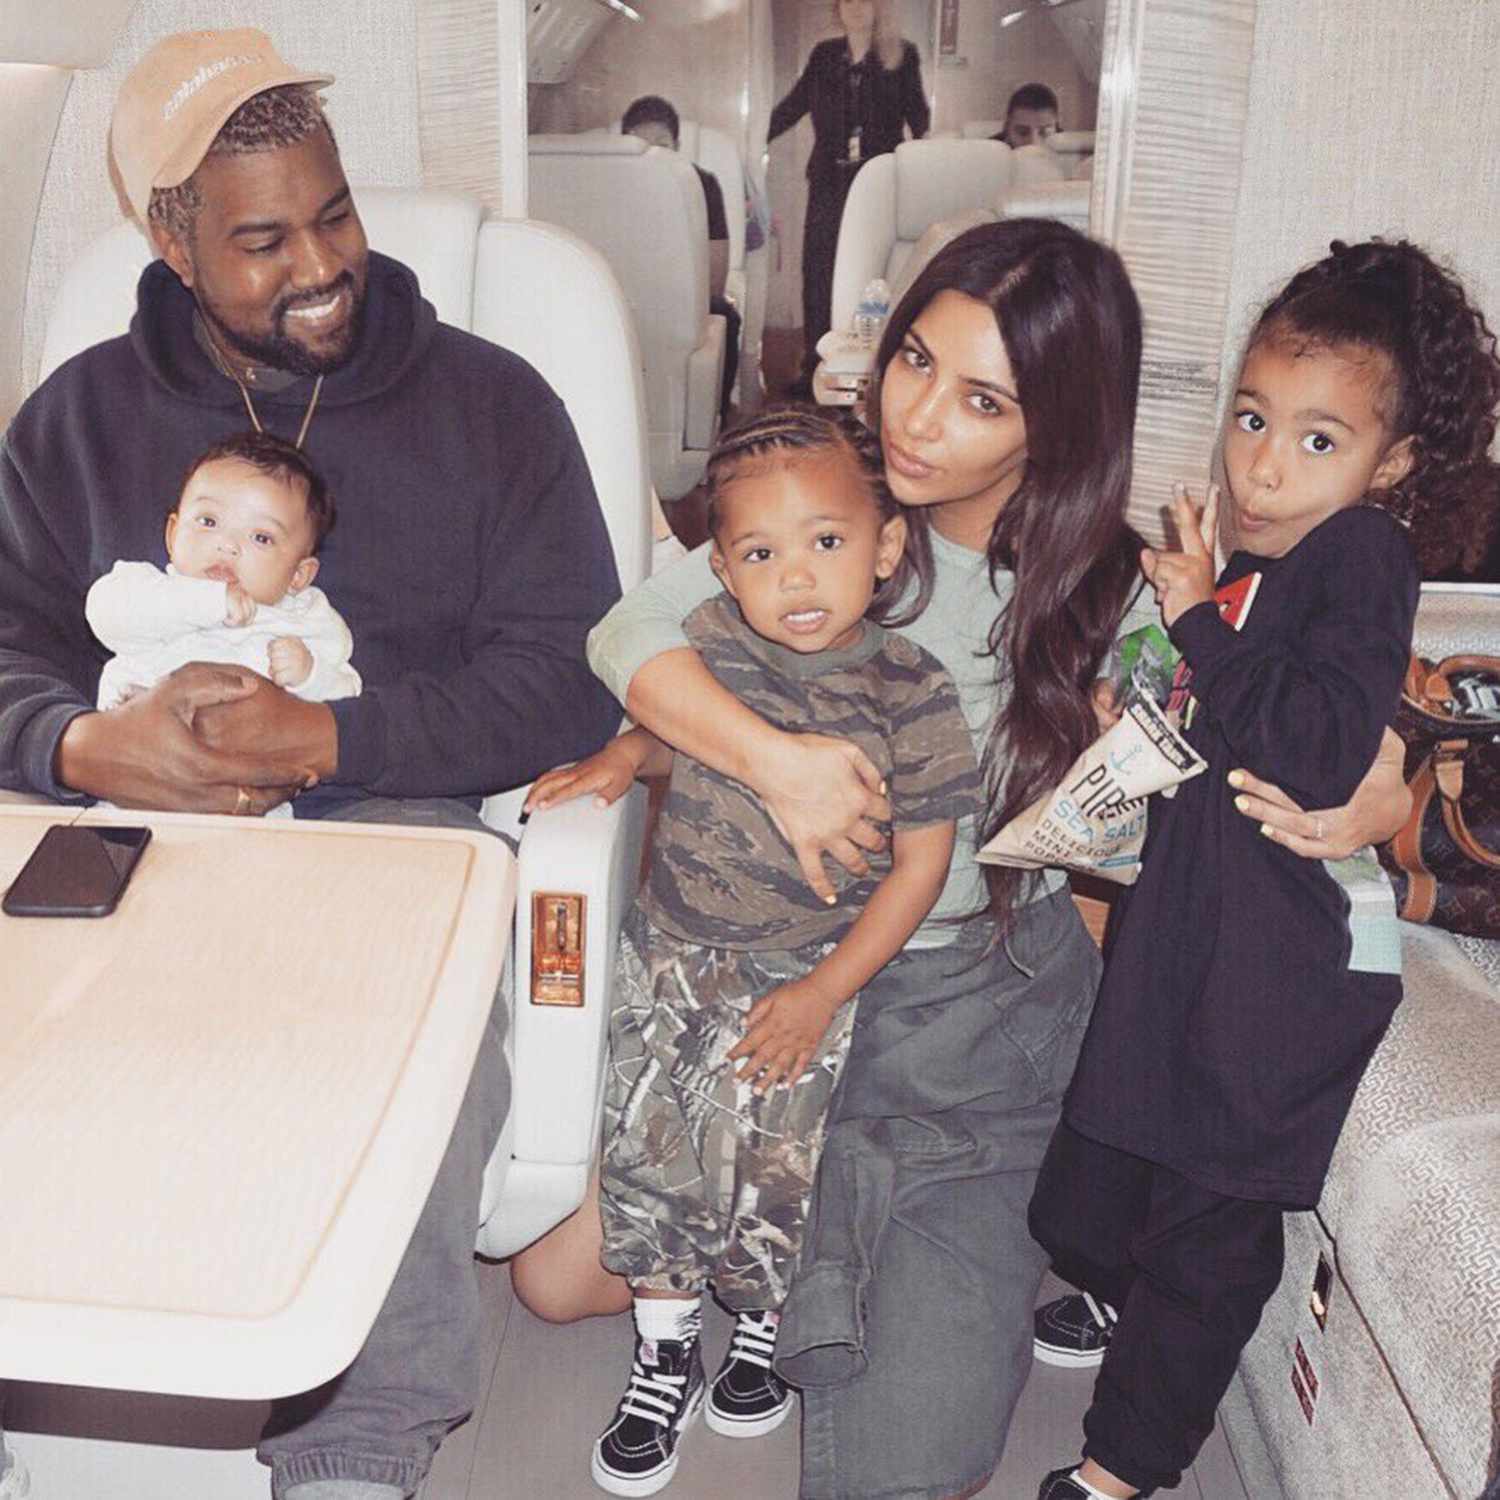 2. North, Saint, and Chicago West